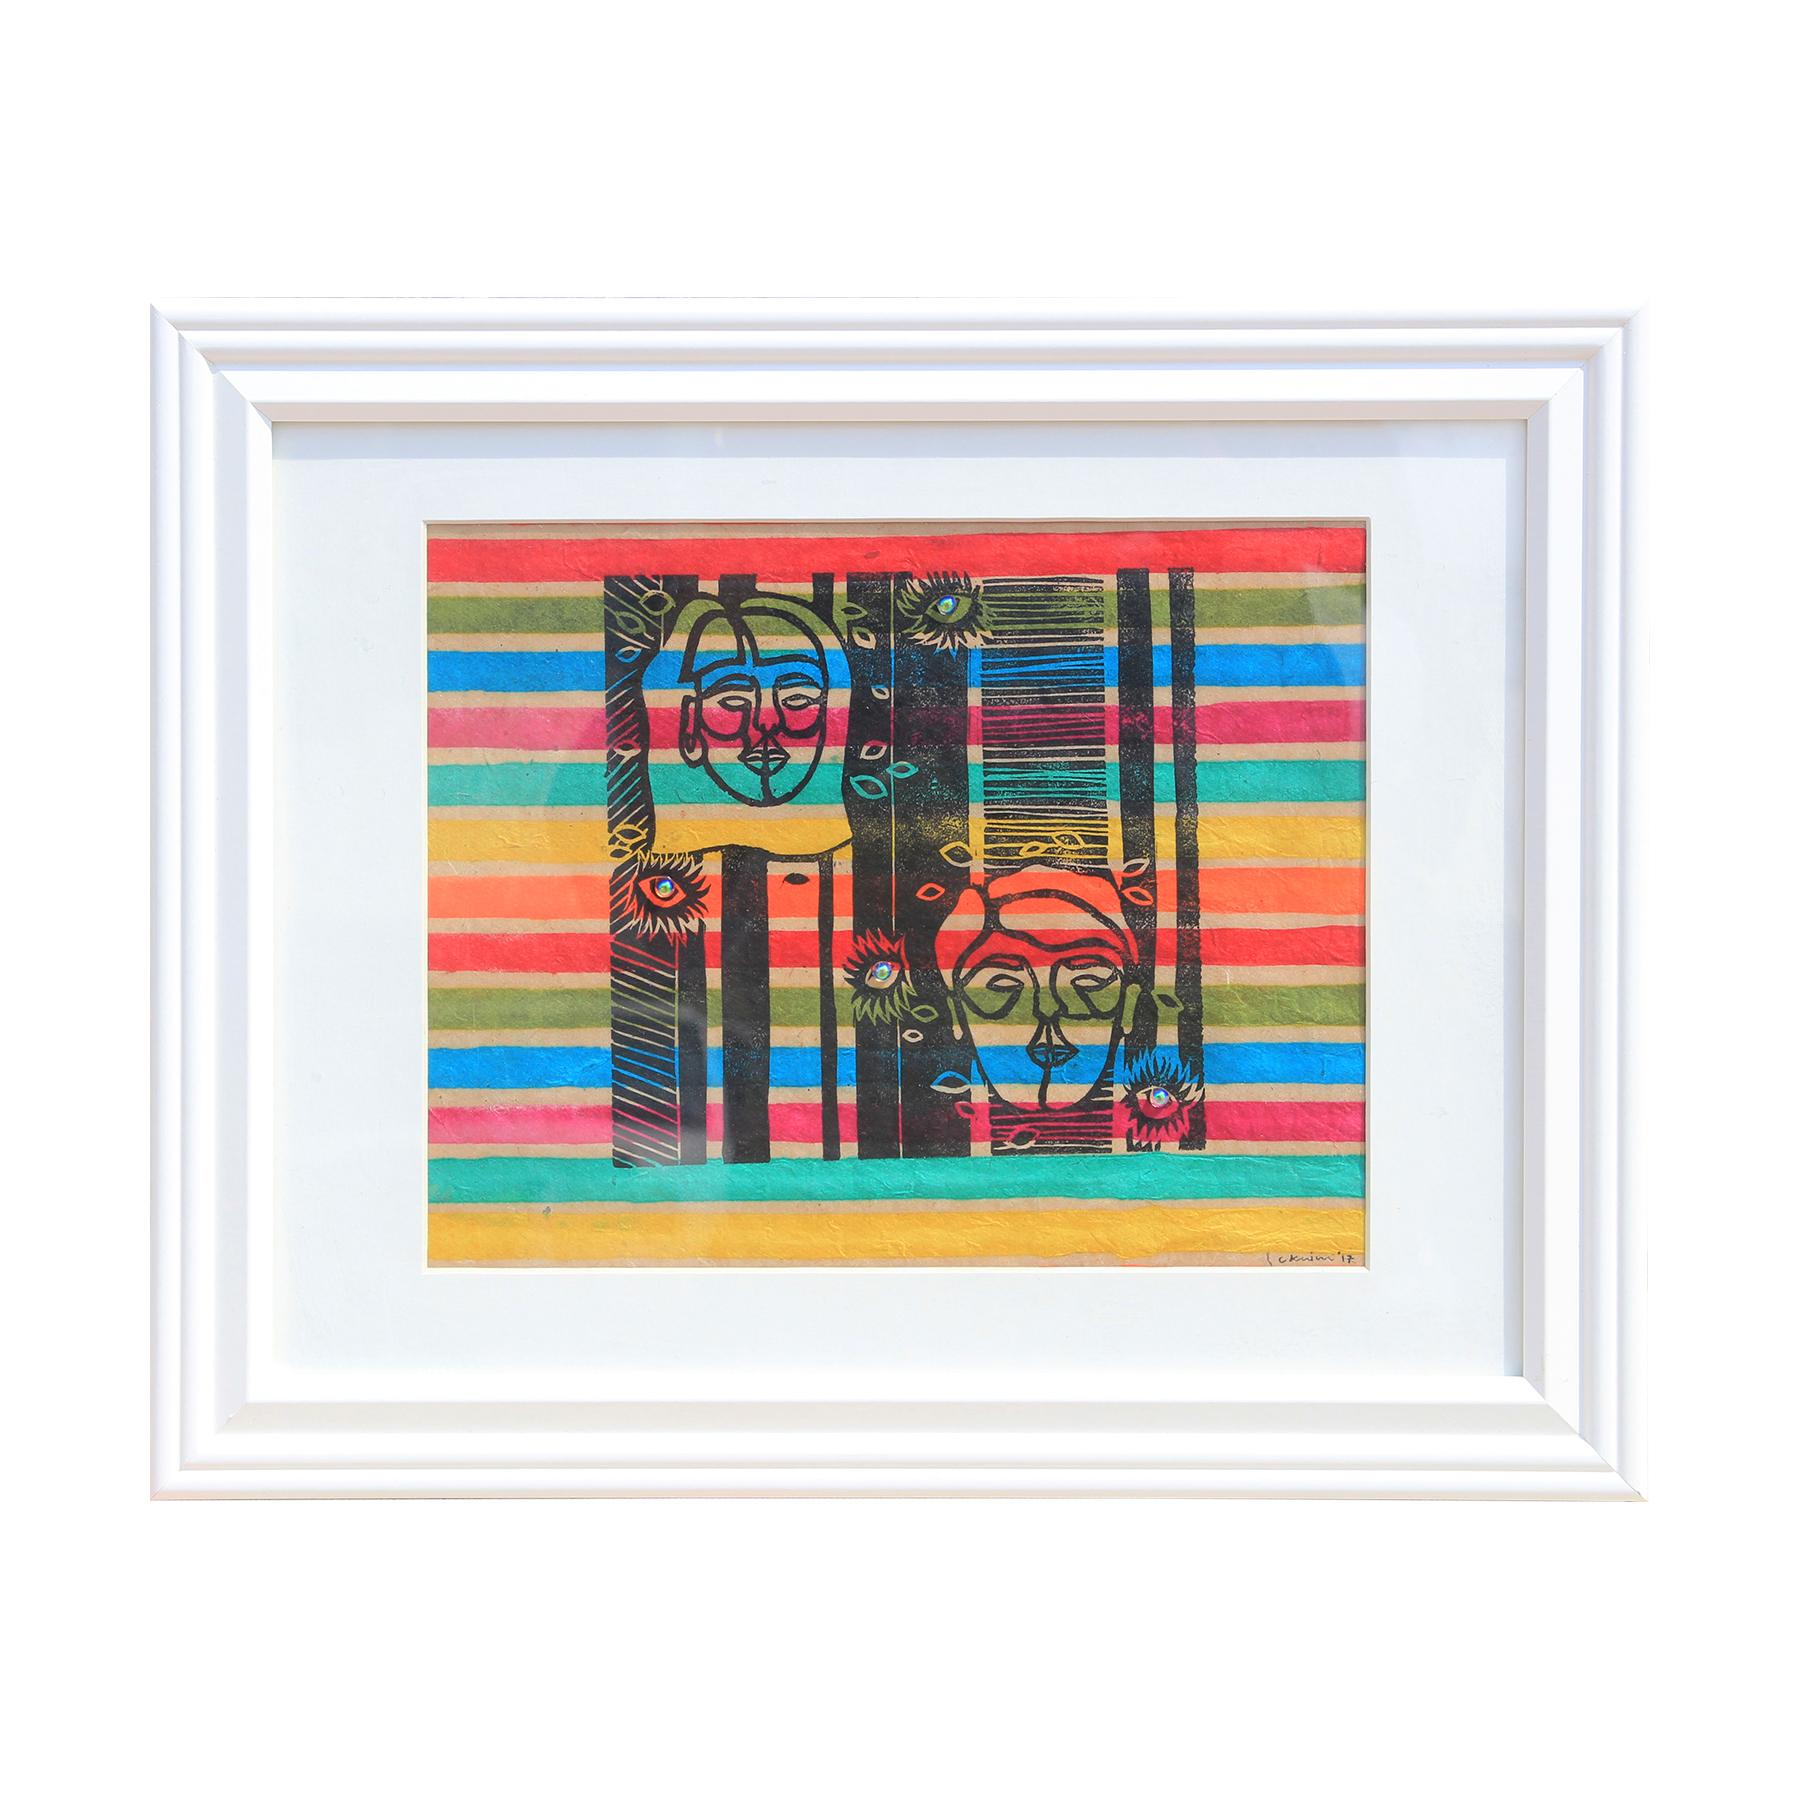 Courtney Khim Abstract Print - "Distance" Print on Rainbow Striped Paper